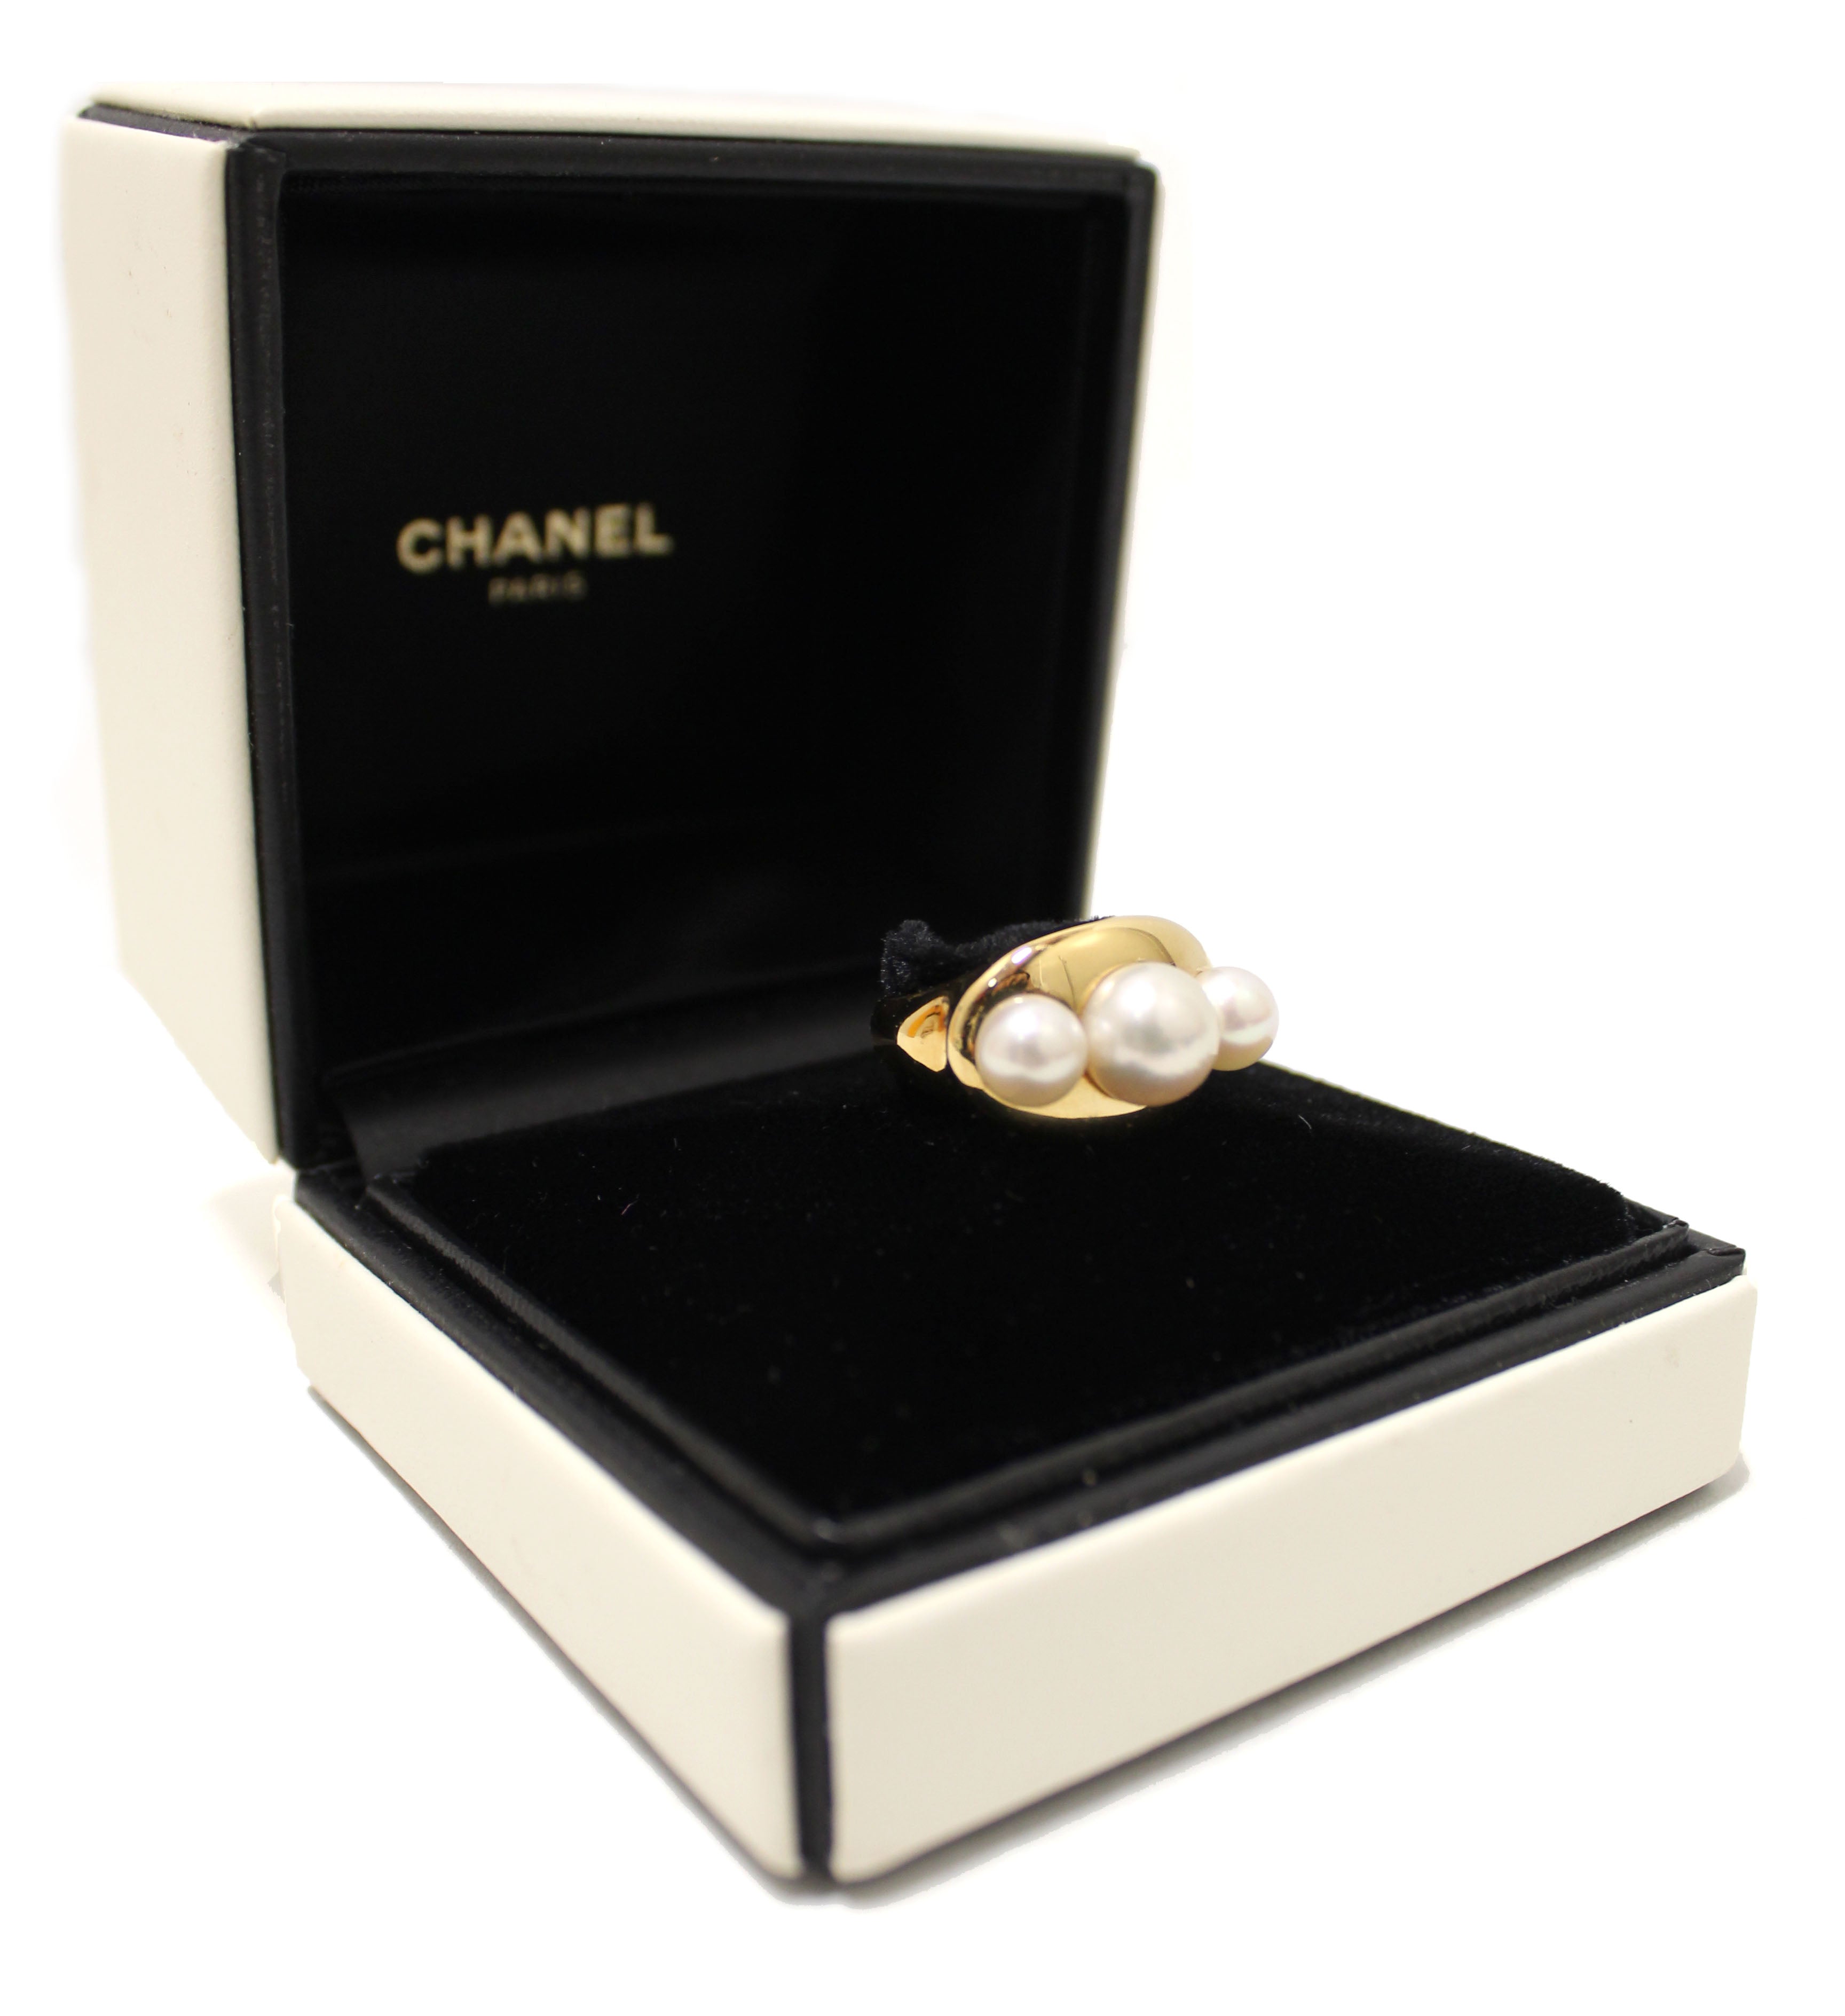 Authentic Chanel 18K Yellow Gold Pearl Ring Size 6